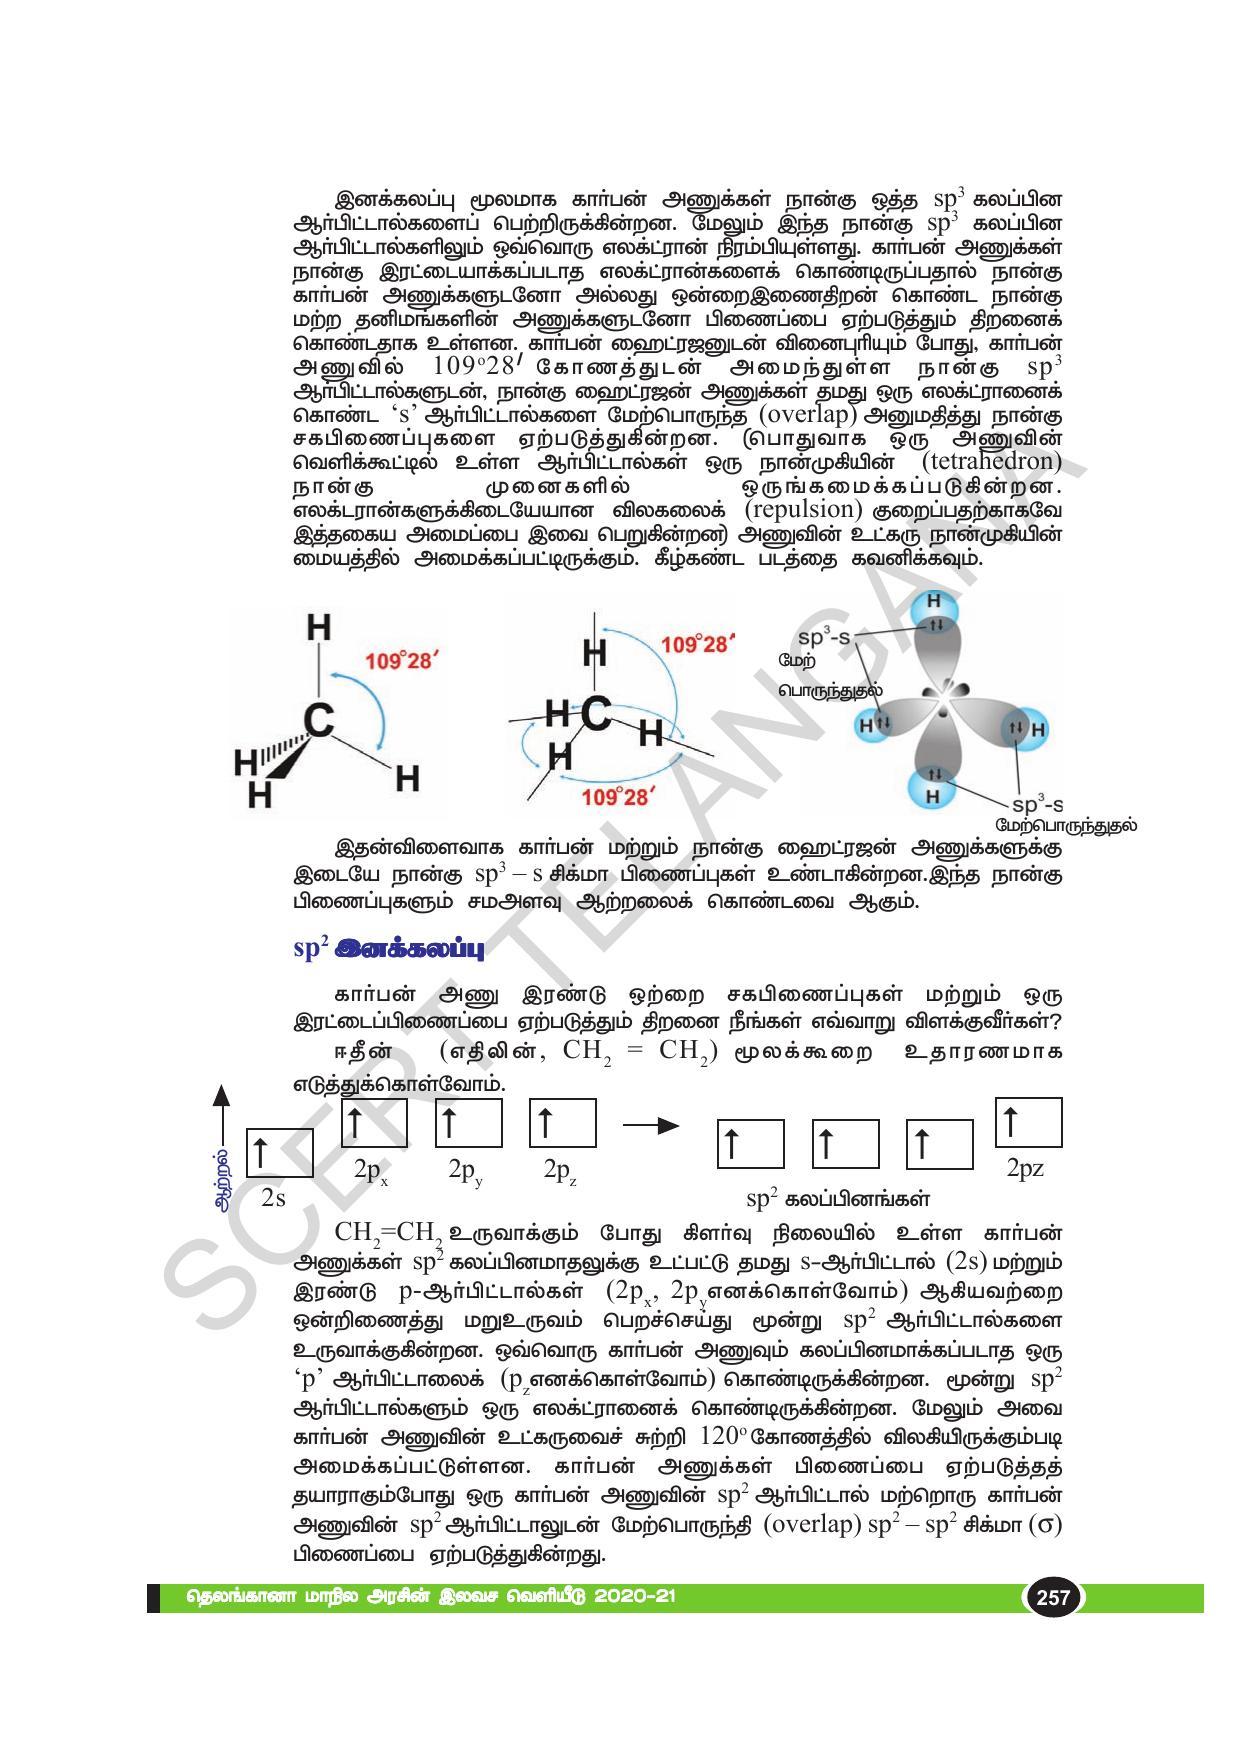 TS SCERT Class 10 Physical Science(Tamil Medium) Text Book - Page 269